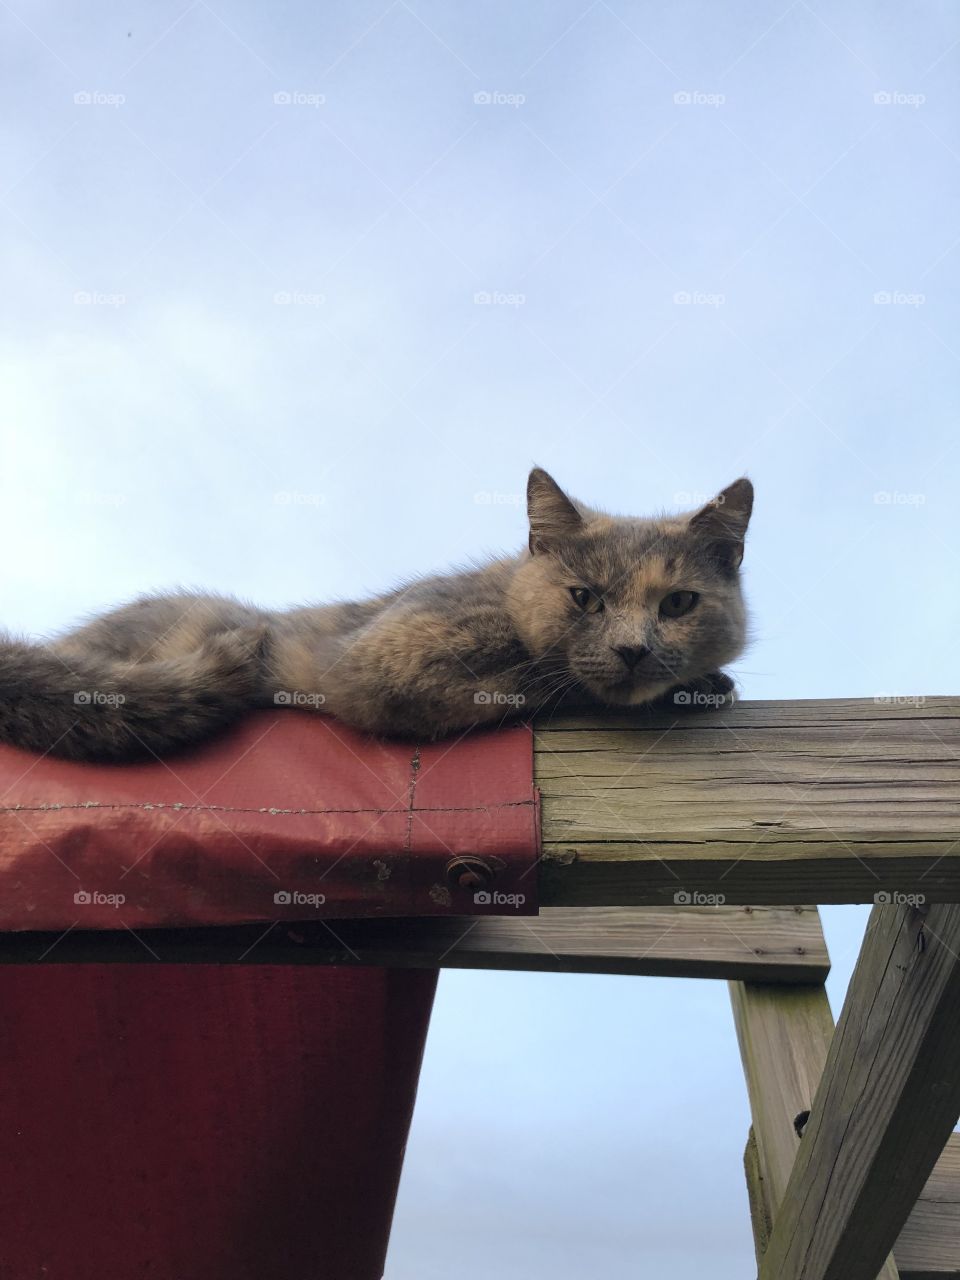 Furry friend hanging out on the swing set